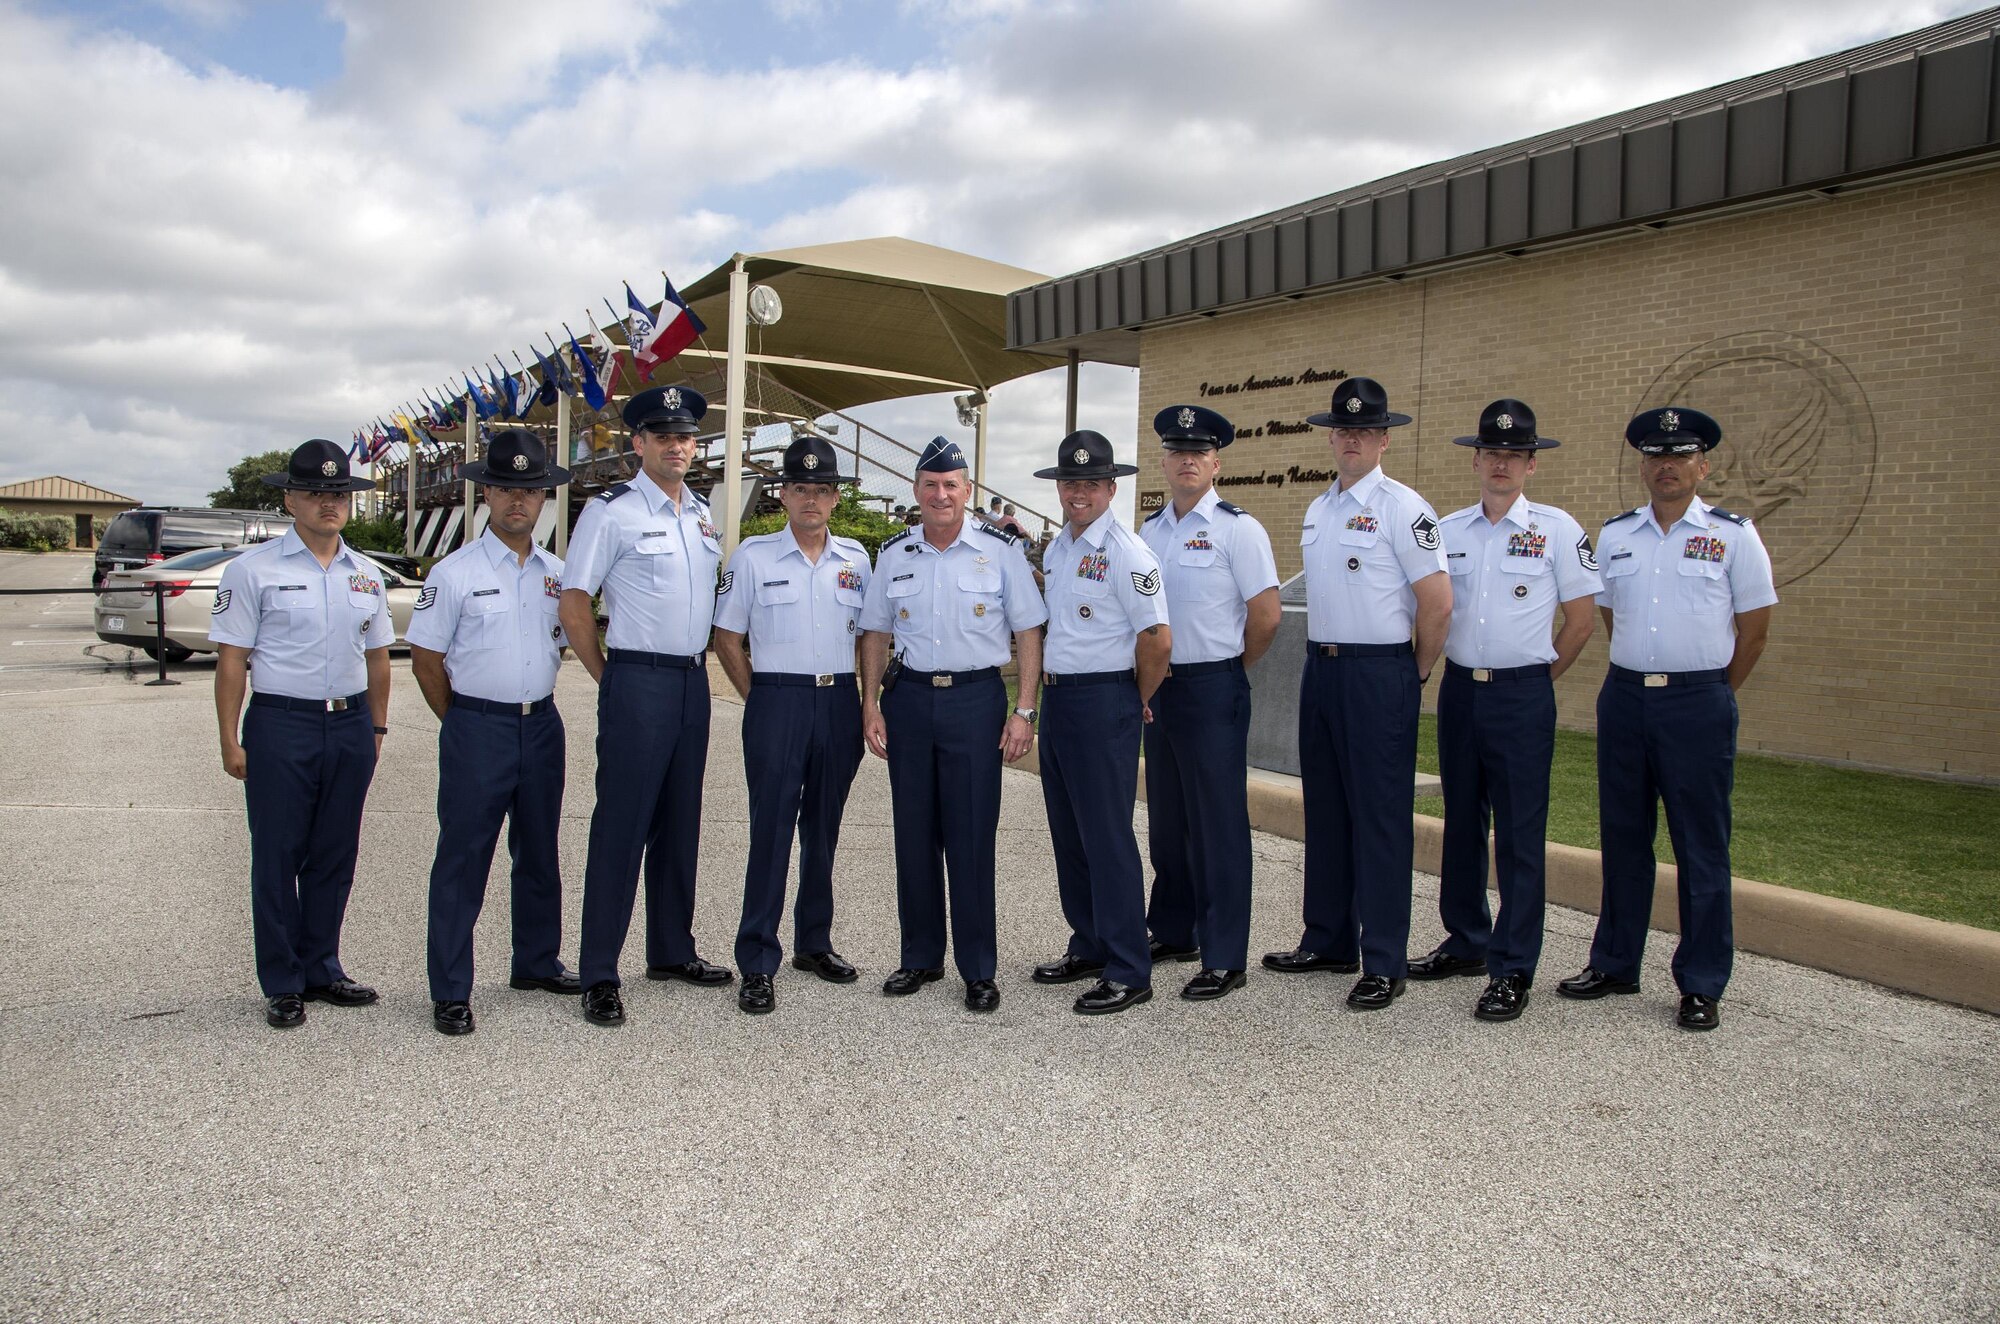 Air Force Chief of Staff Gen. David Goldfein takes a photo with military training instructors after a basic military training graduation June 16, 2017, at Joint Base San Antonio-Lackland. Goldfein toured various JBSA-Lackland facilities and met many 37th Training Wing Airmen during his two-day visit. Every enlisted Airmen begins their Air Force career at basic military training. JBSA-Lackland is often referred to as the "Gateway to the Air Force," graduating about 39,000 Airmen annually. BMT is one of the missions of the 37th Training Wing, the largest training wing in the United States Air Force. (U.S. Air Force photo by Johnny Saldivar)